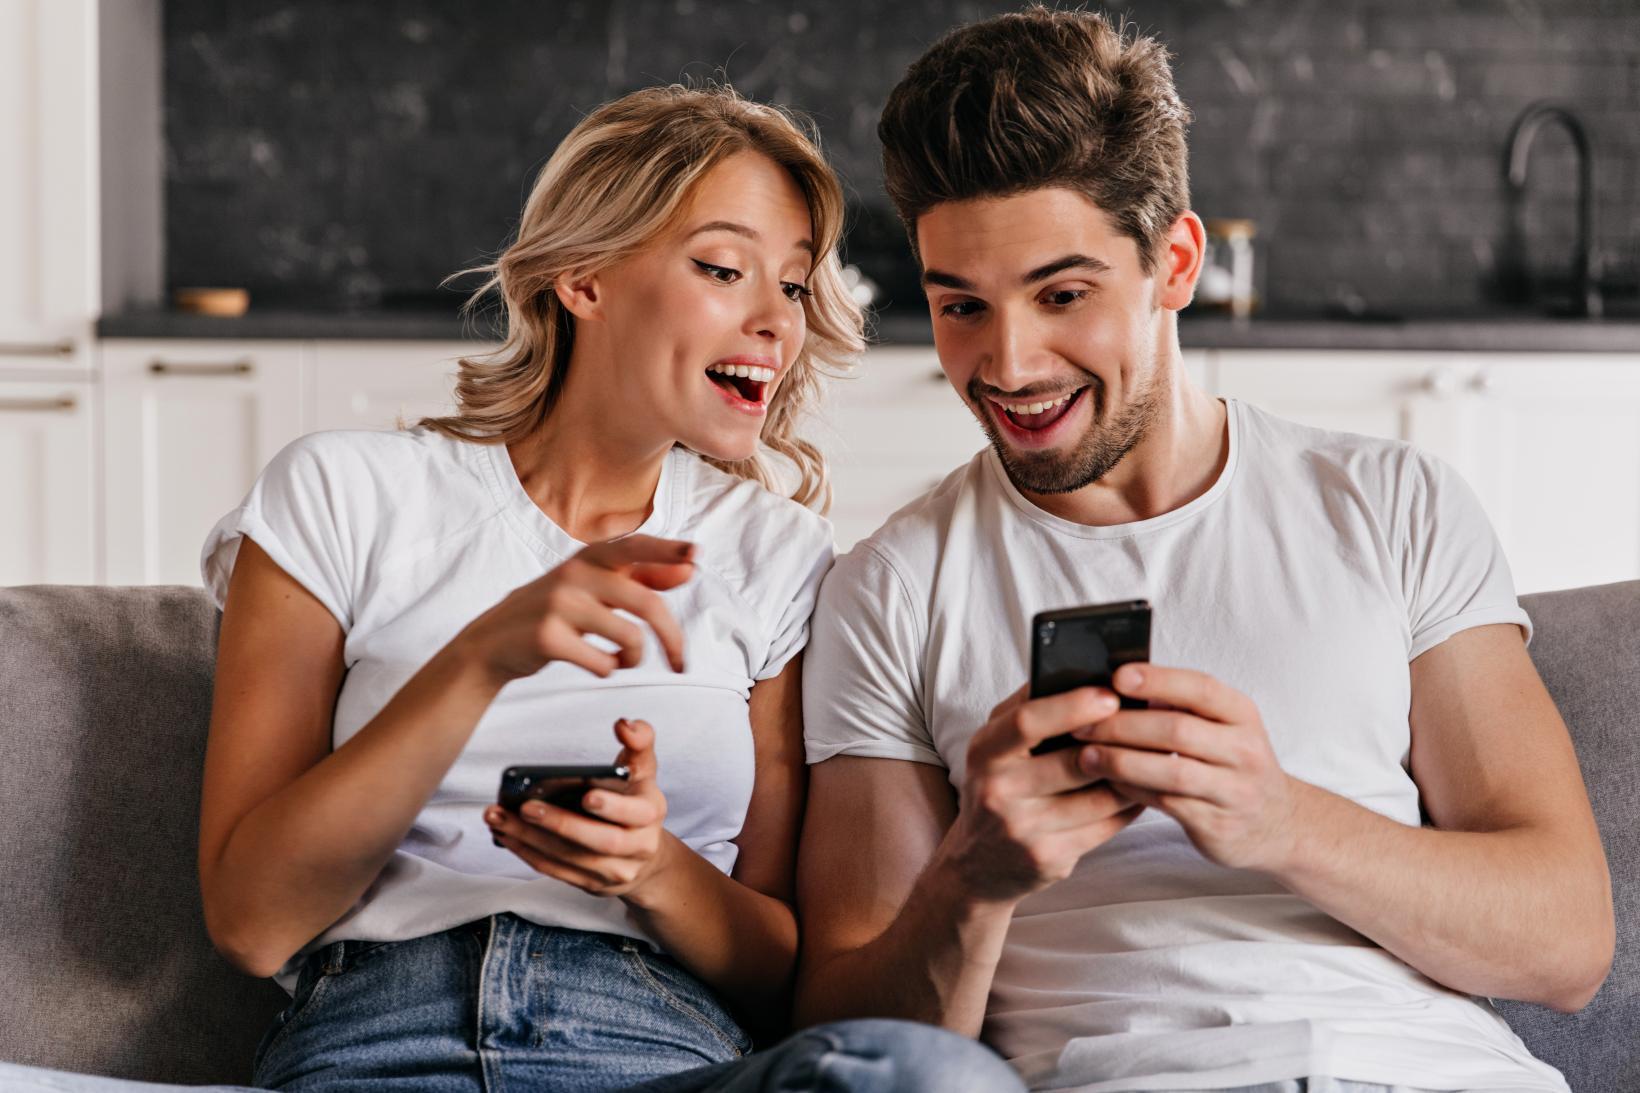 Picture 20220930111932-7357-smiling-couple-sitting-couch-with-phones-adorable-young-woman-holding-smartphone  format jpg